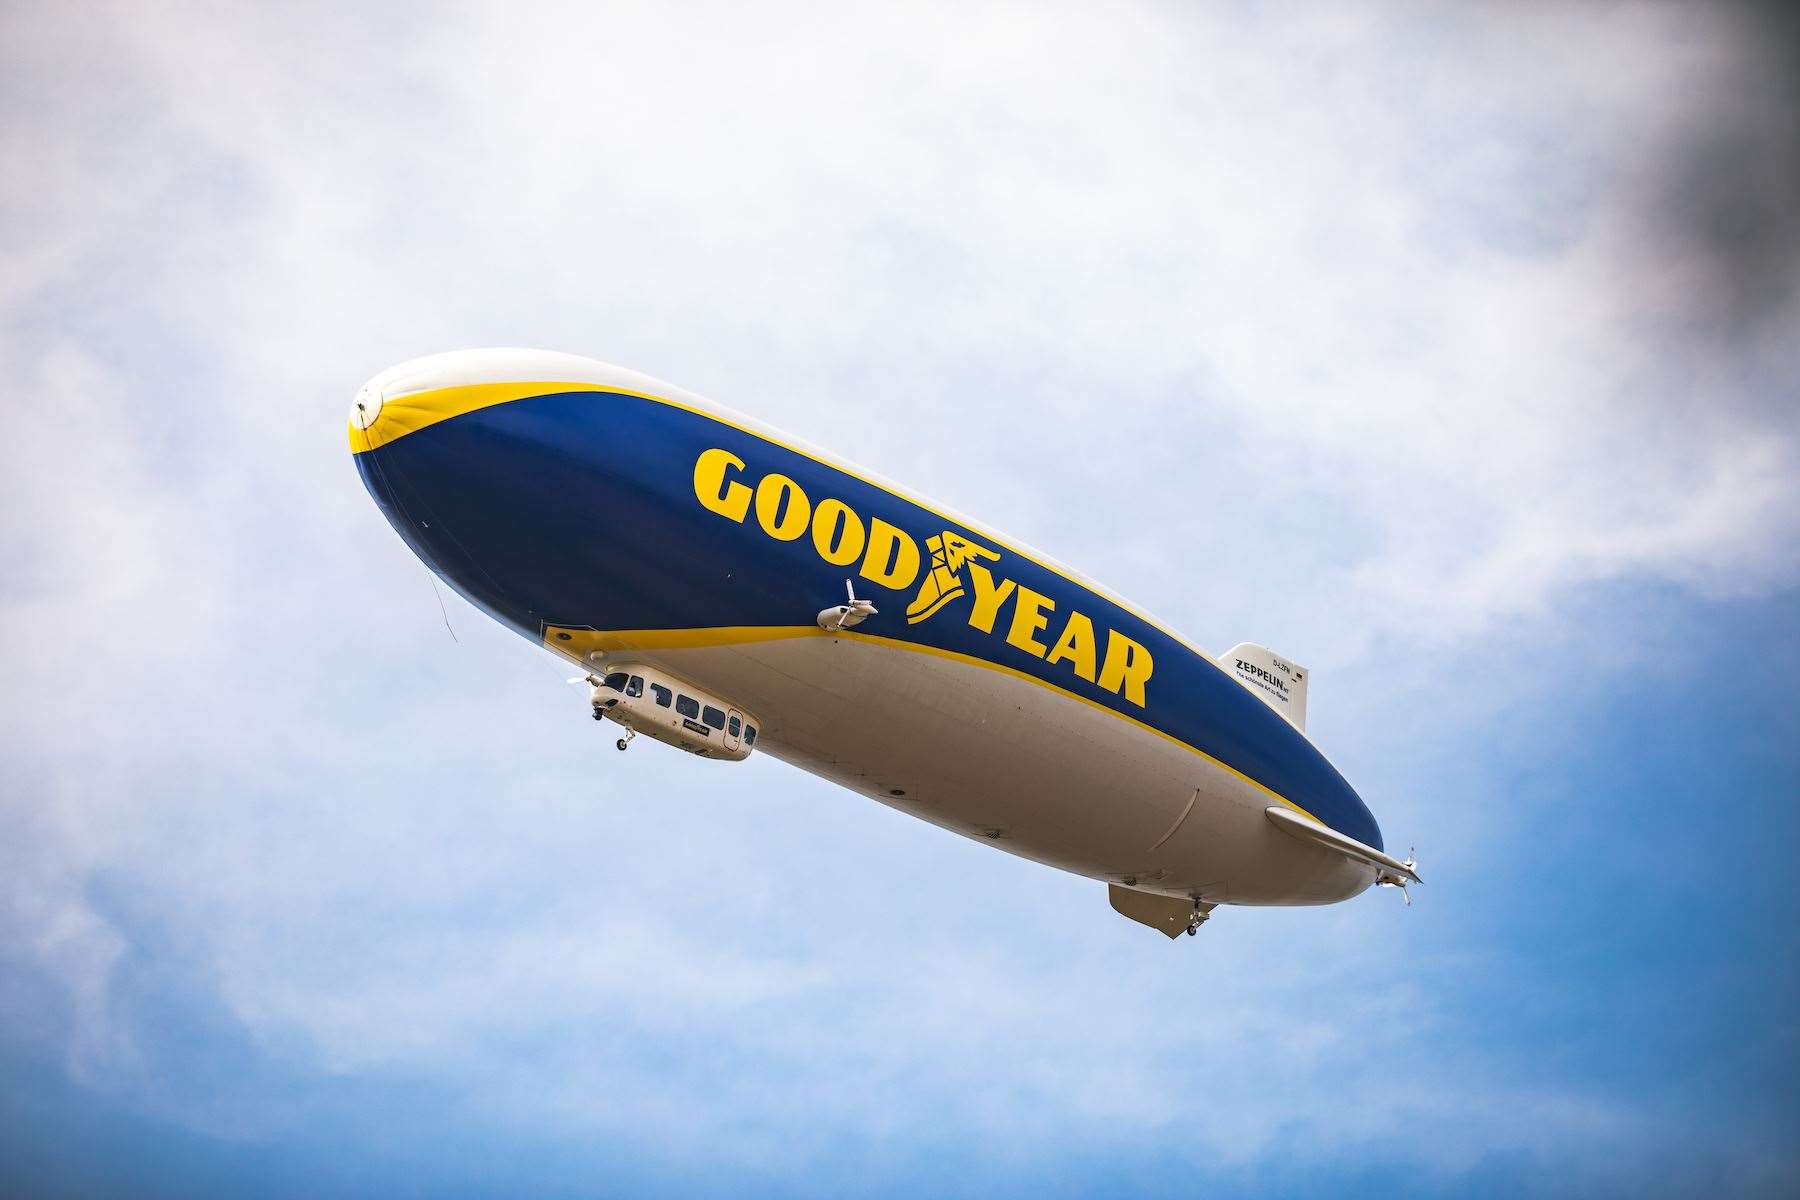 The Goodyear blimp is visiting Kent after 10 years away. Photo: Goodyear